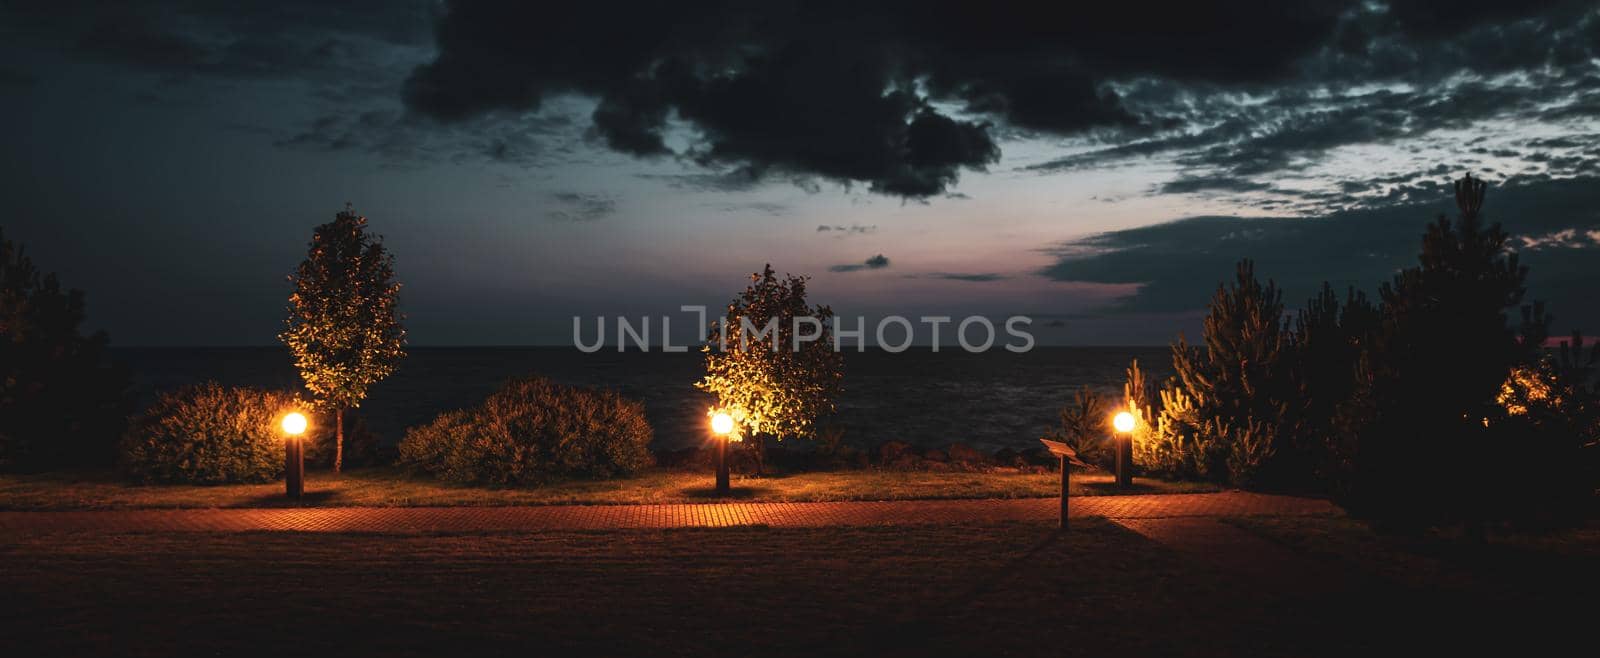 Evening on the seaside with a path lit by lanterns, bushes and pines and dramatic clouds